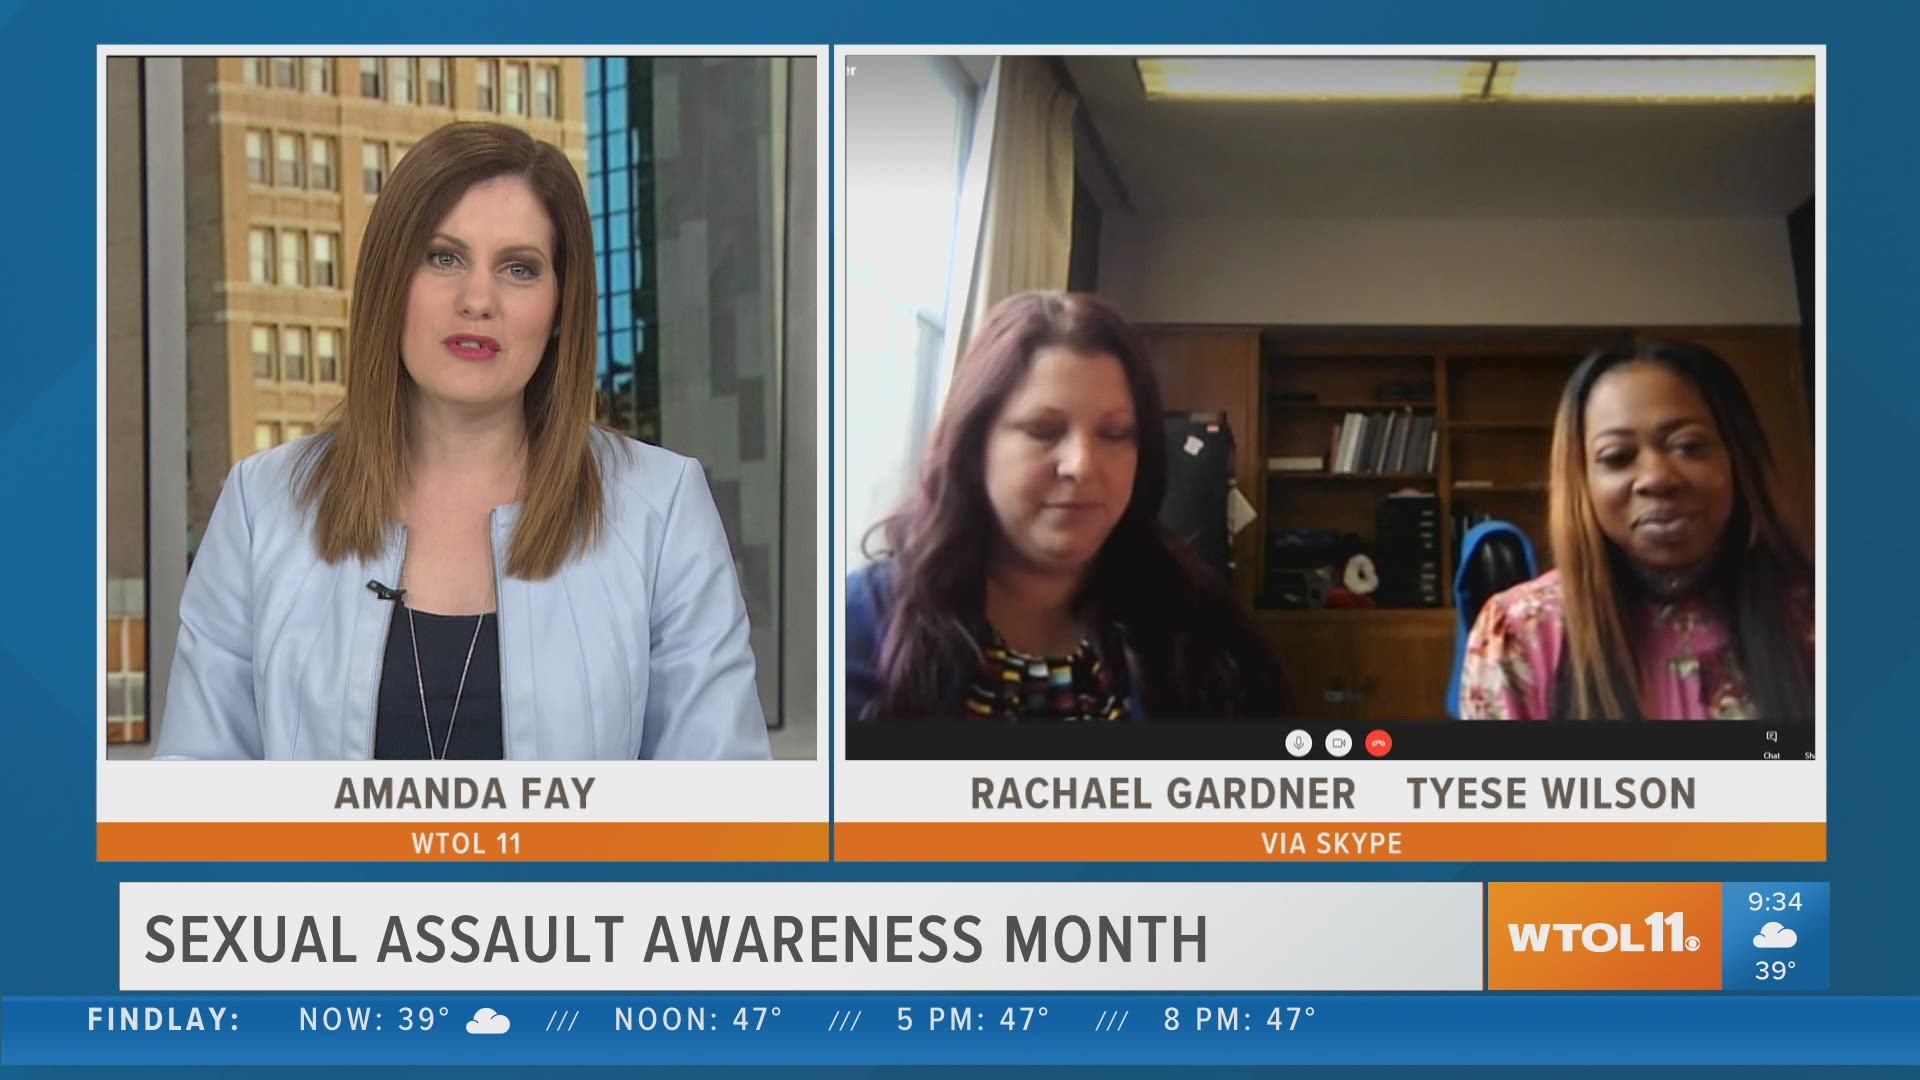 This is the 20th year of Sexual Assault Awareness Month. Learn more about how the YWCA helps victims of sexual assault and how you can offer your support!